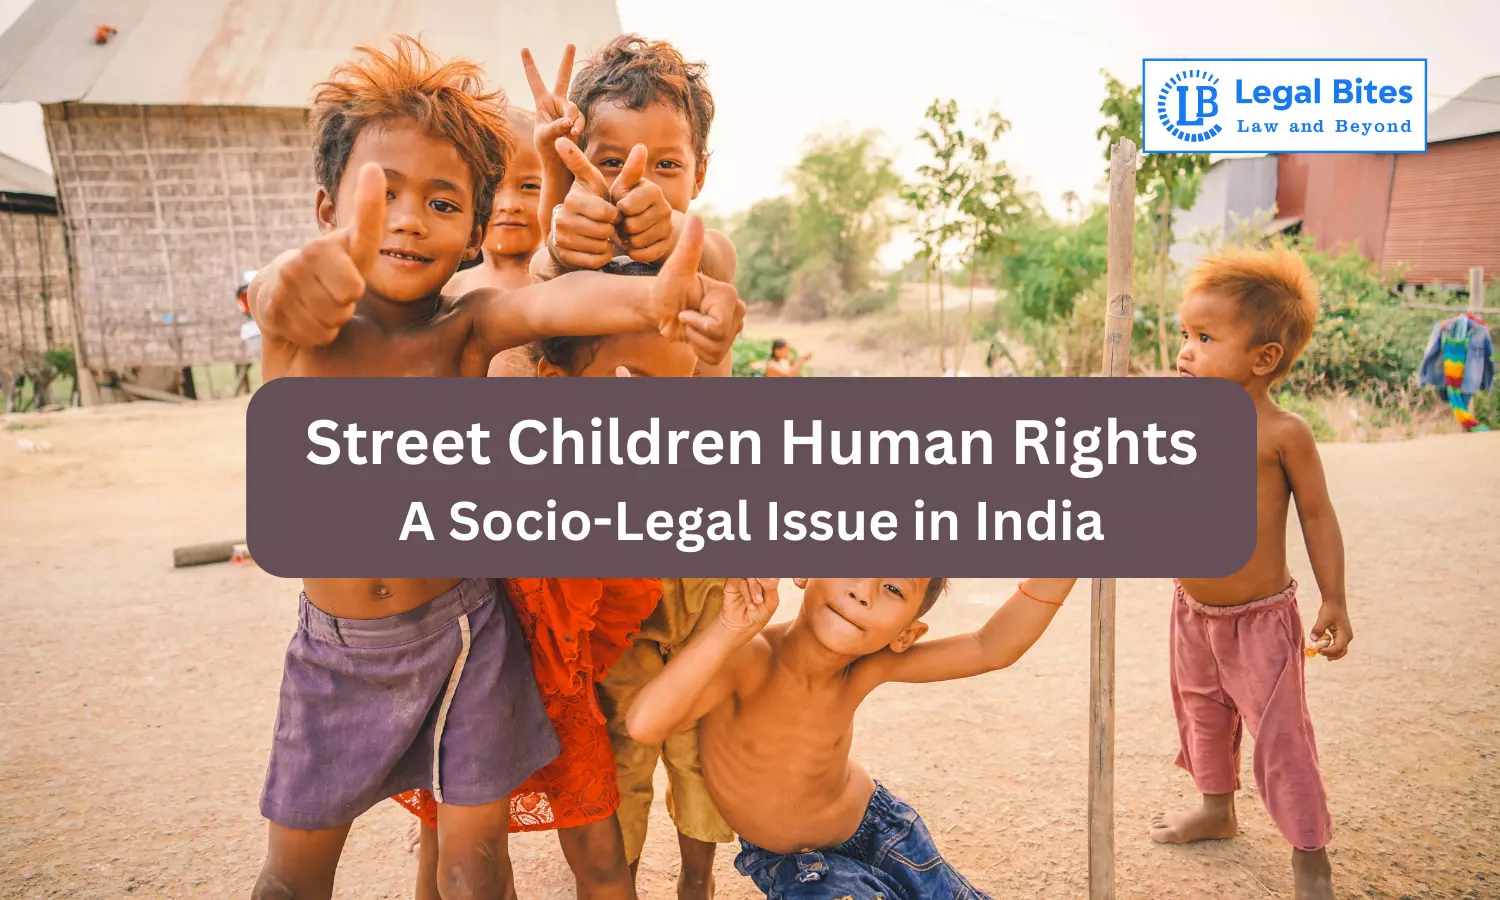 Street Children Human Rights: A Socio-Legal Issue in India